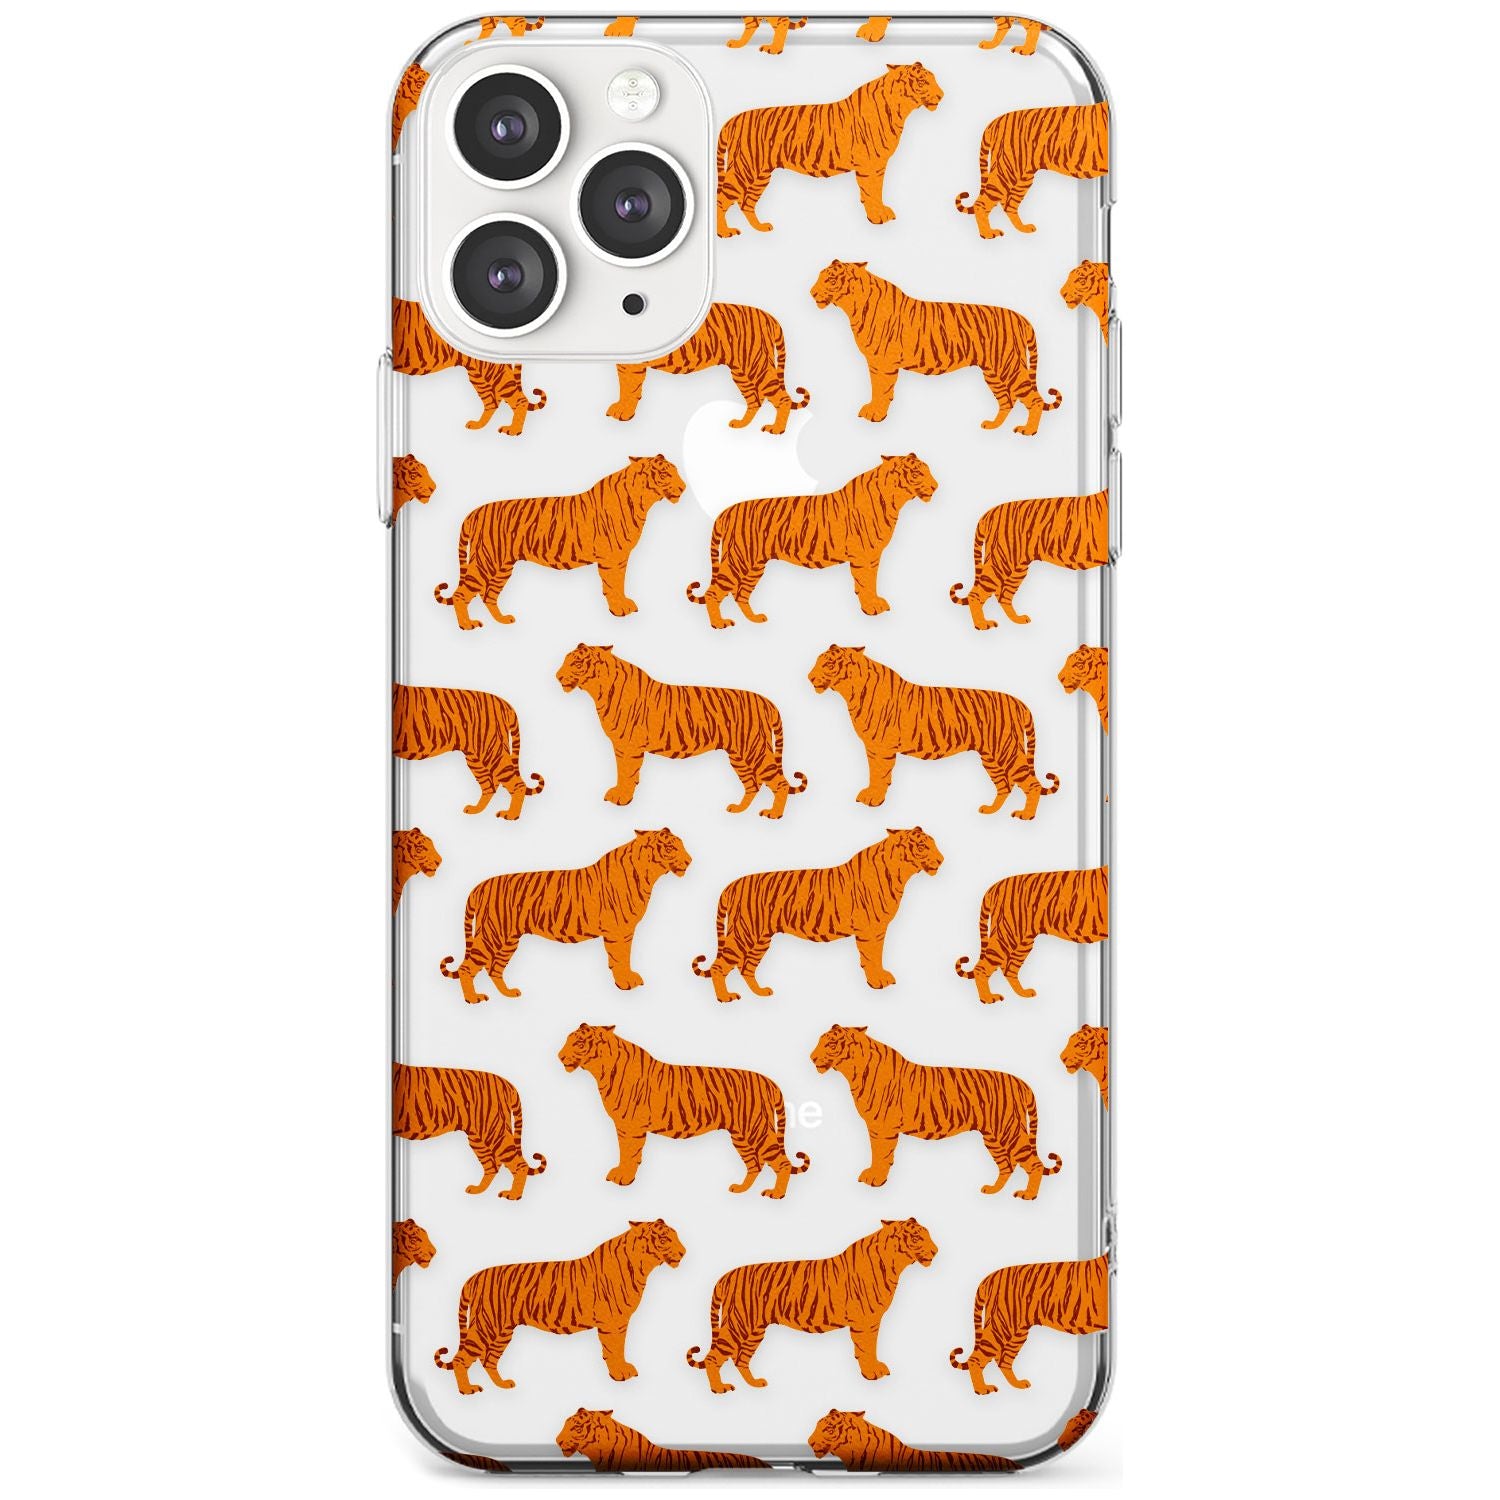 Tigers on Clear Pattern Slim TPU Phone Case for iPhone 11 Pro Max